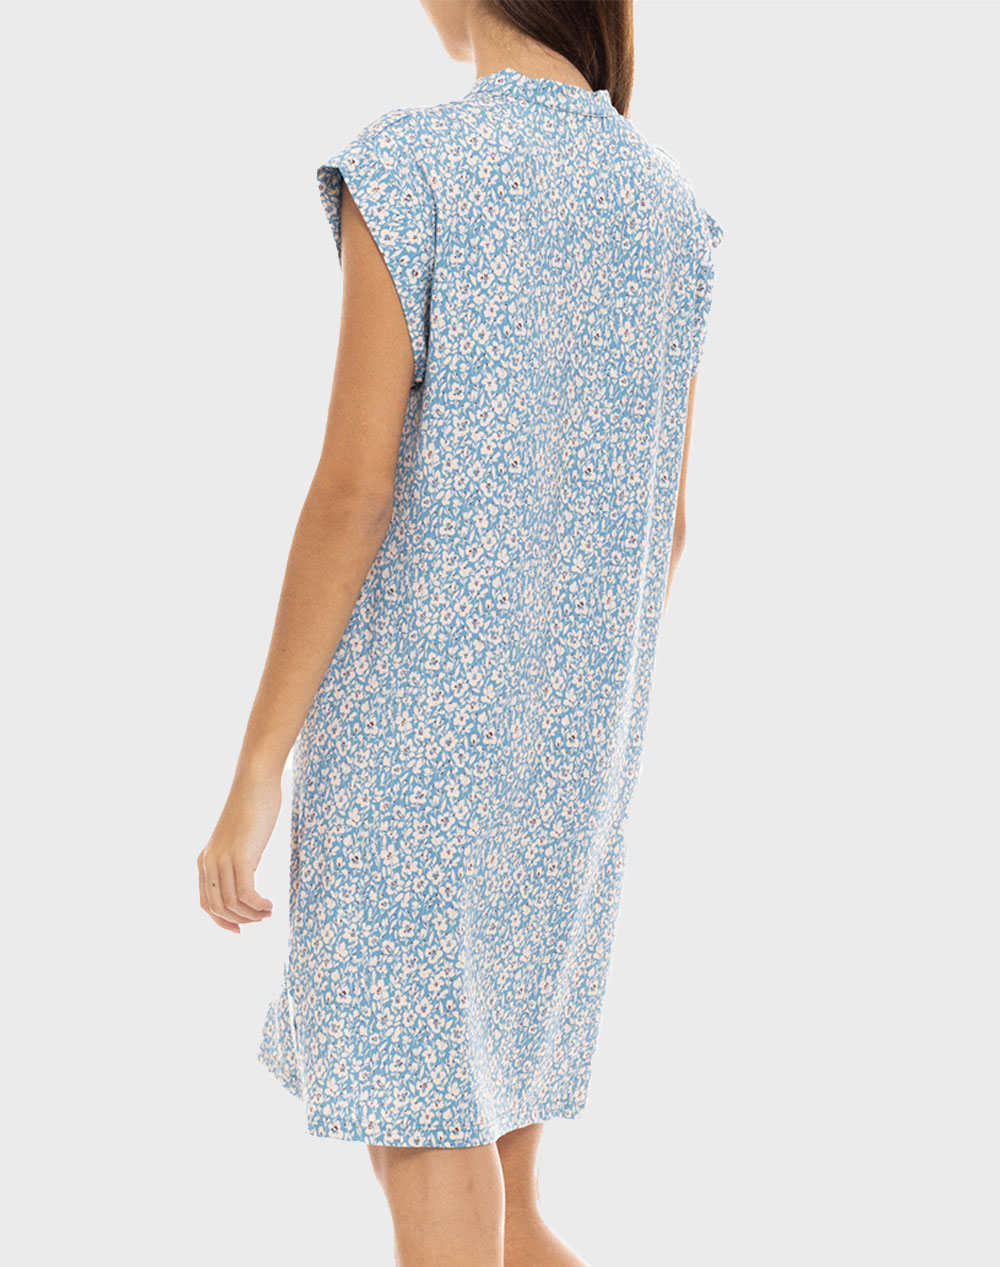 PINK LABEL NIGHTGOWN BLUE FLOWER